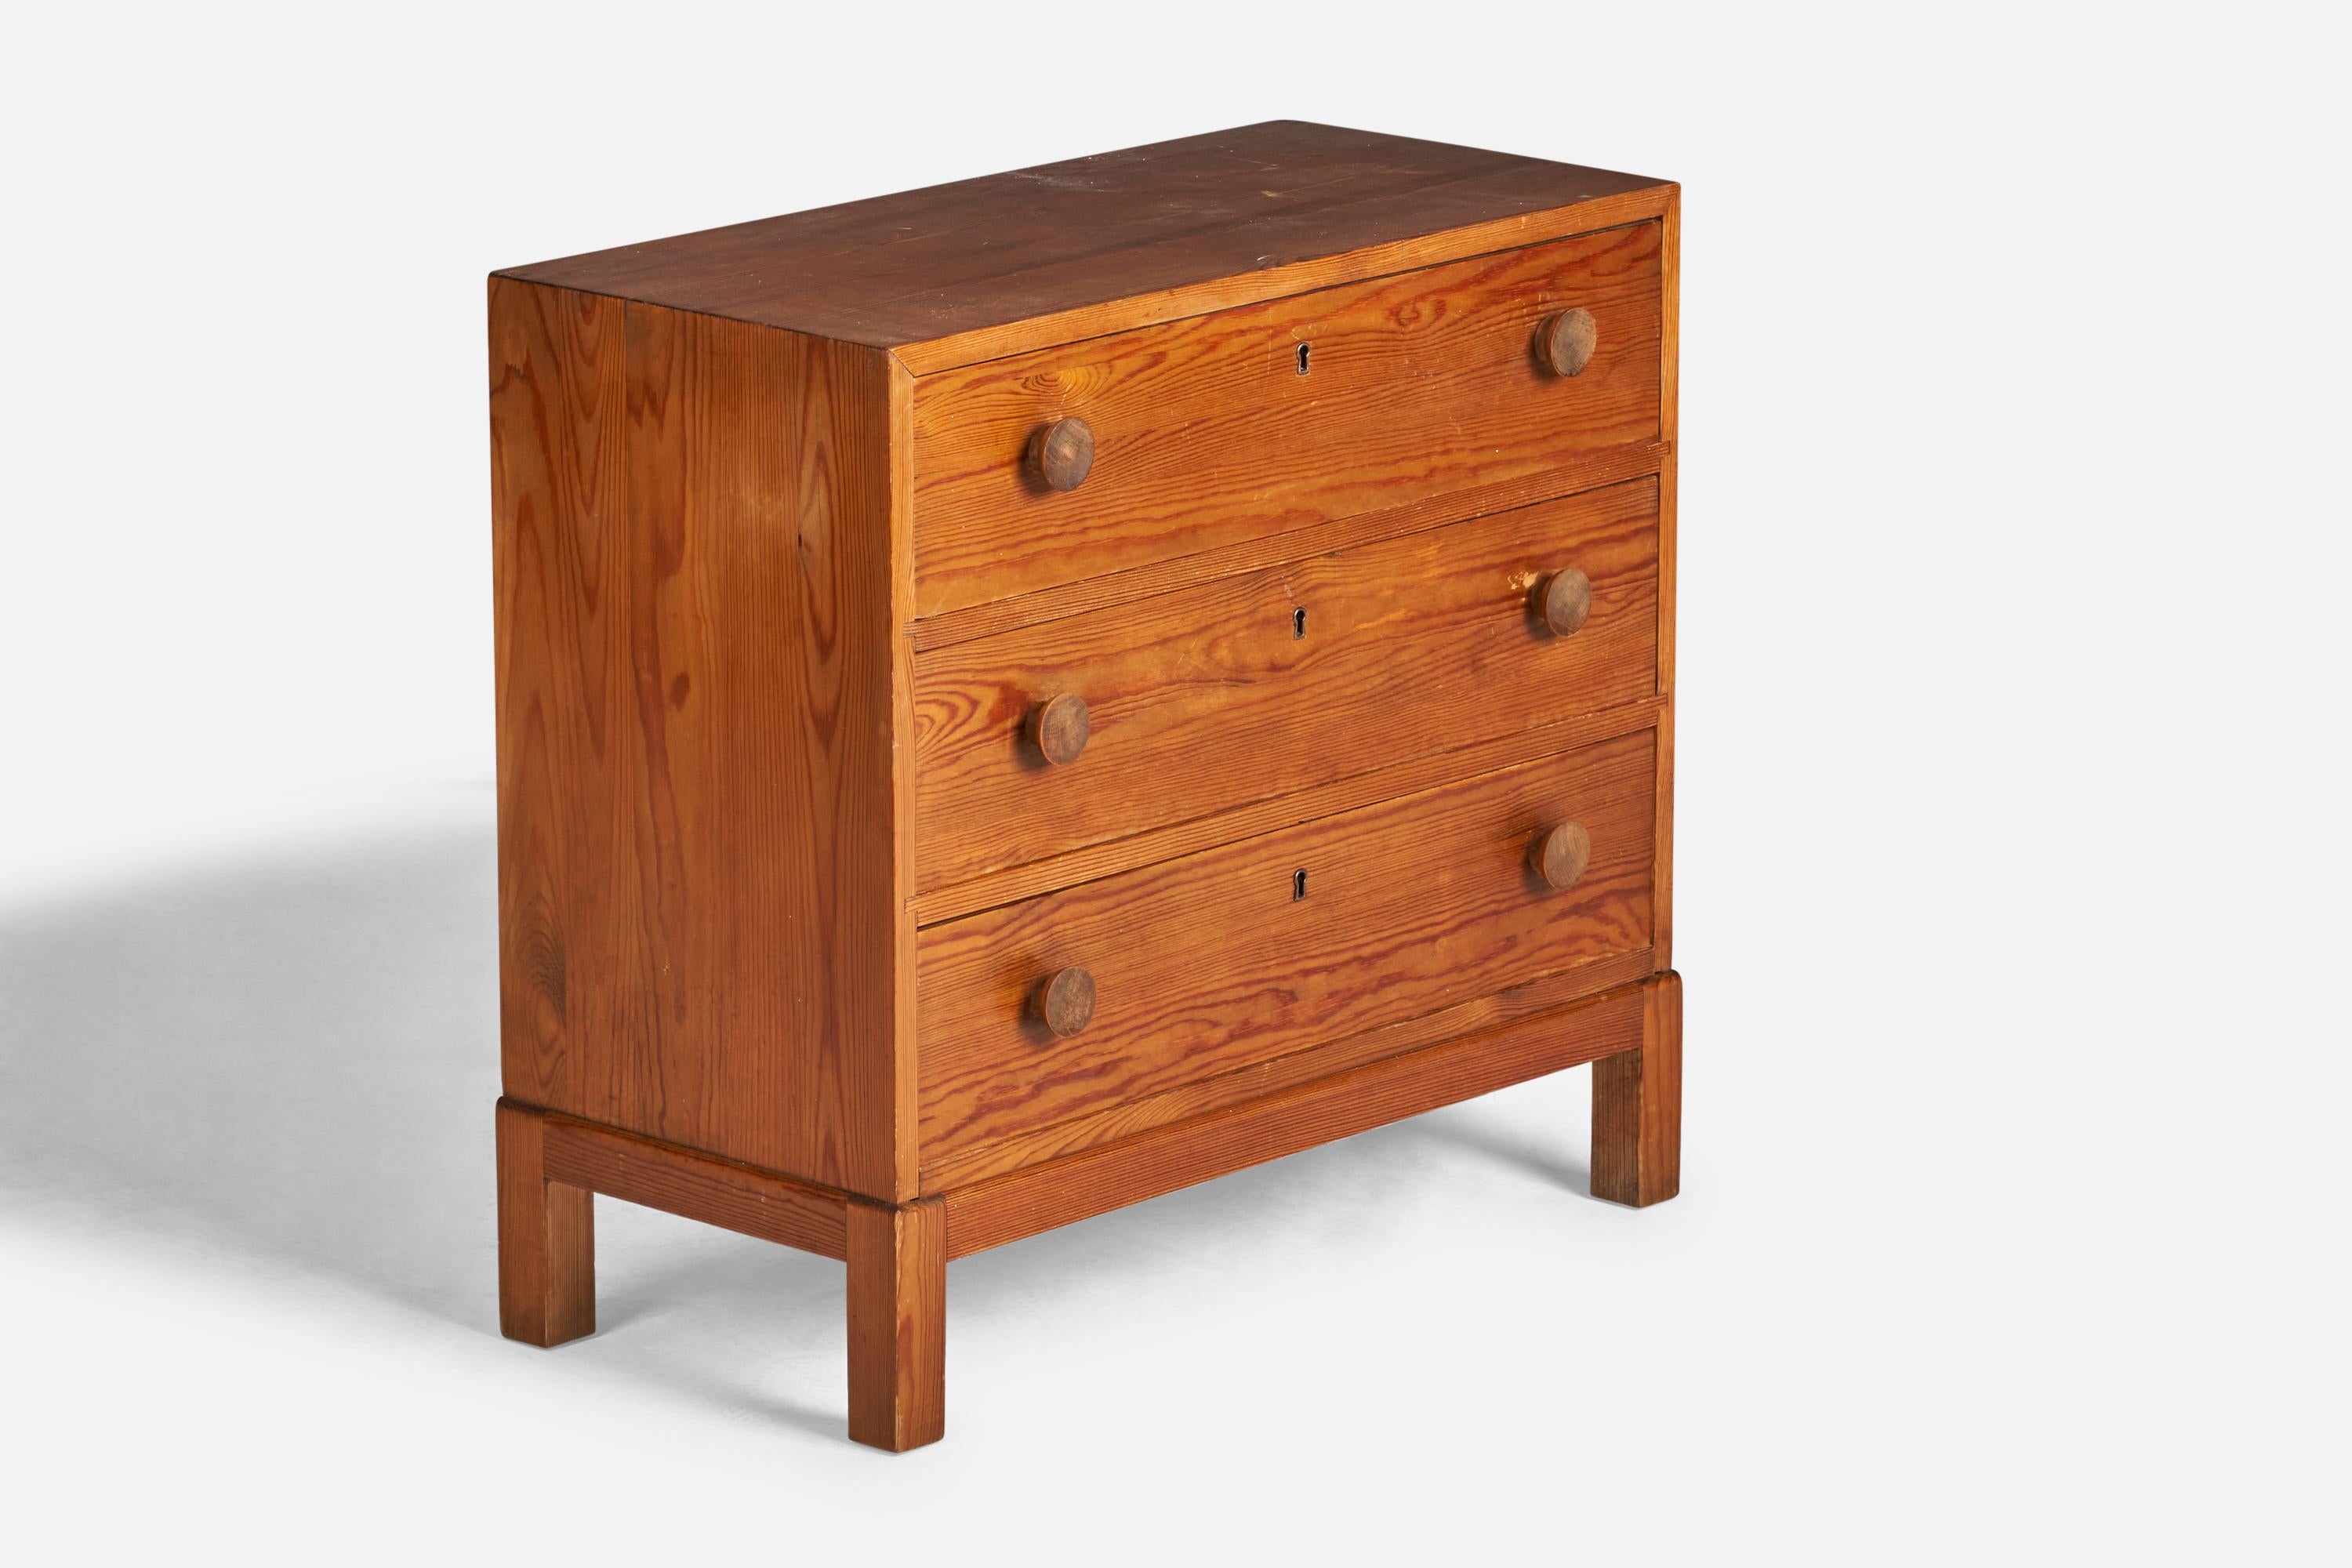 A chest of drawers designed and produced in Sweden, c. 1930s.